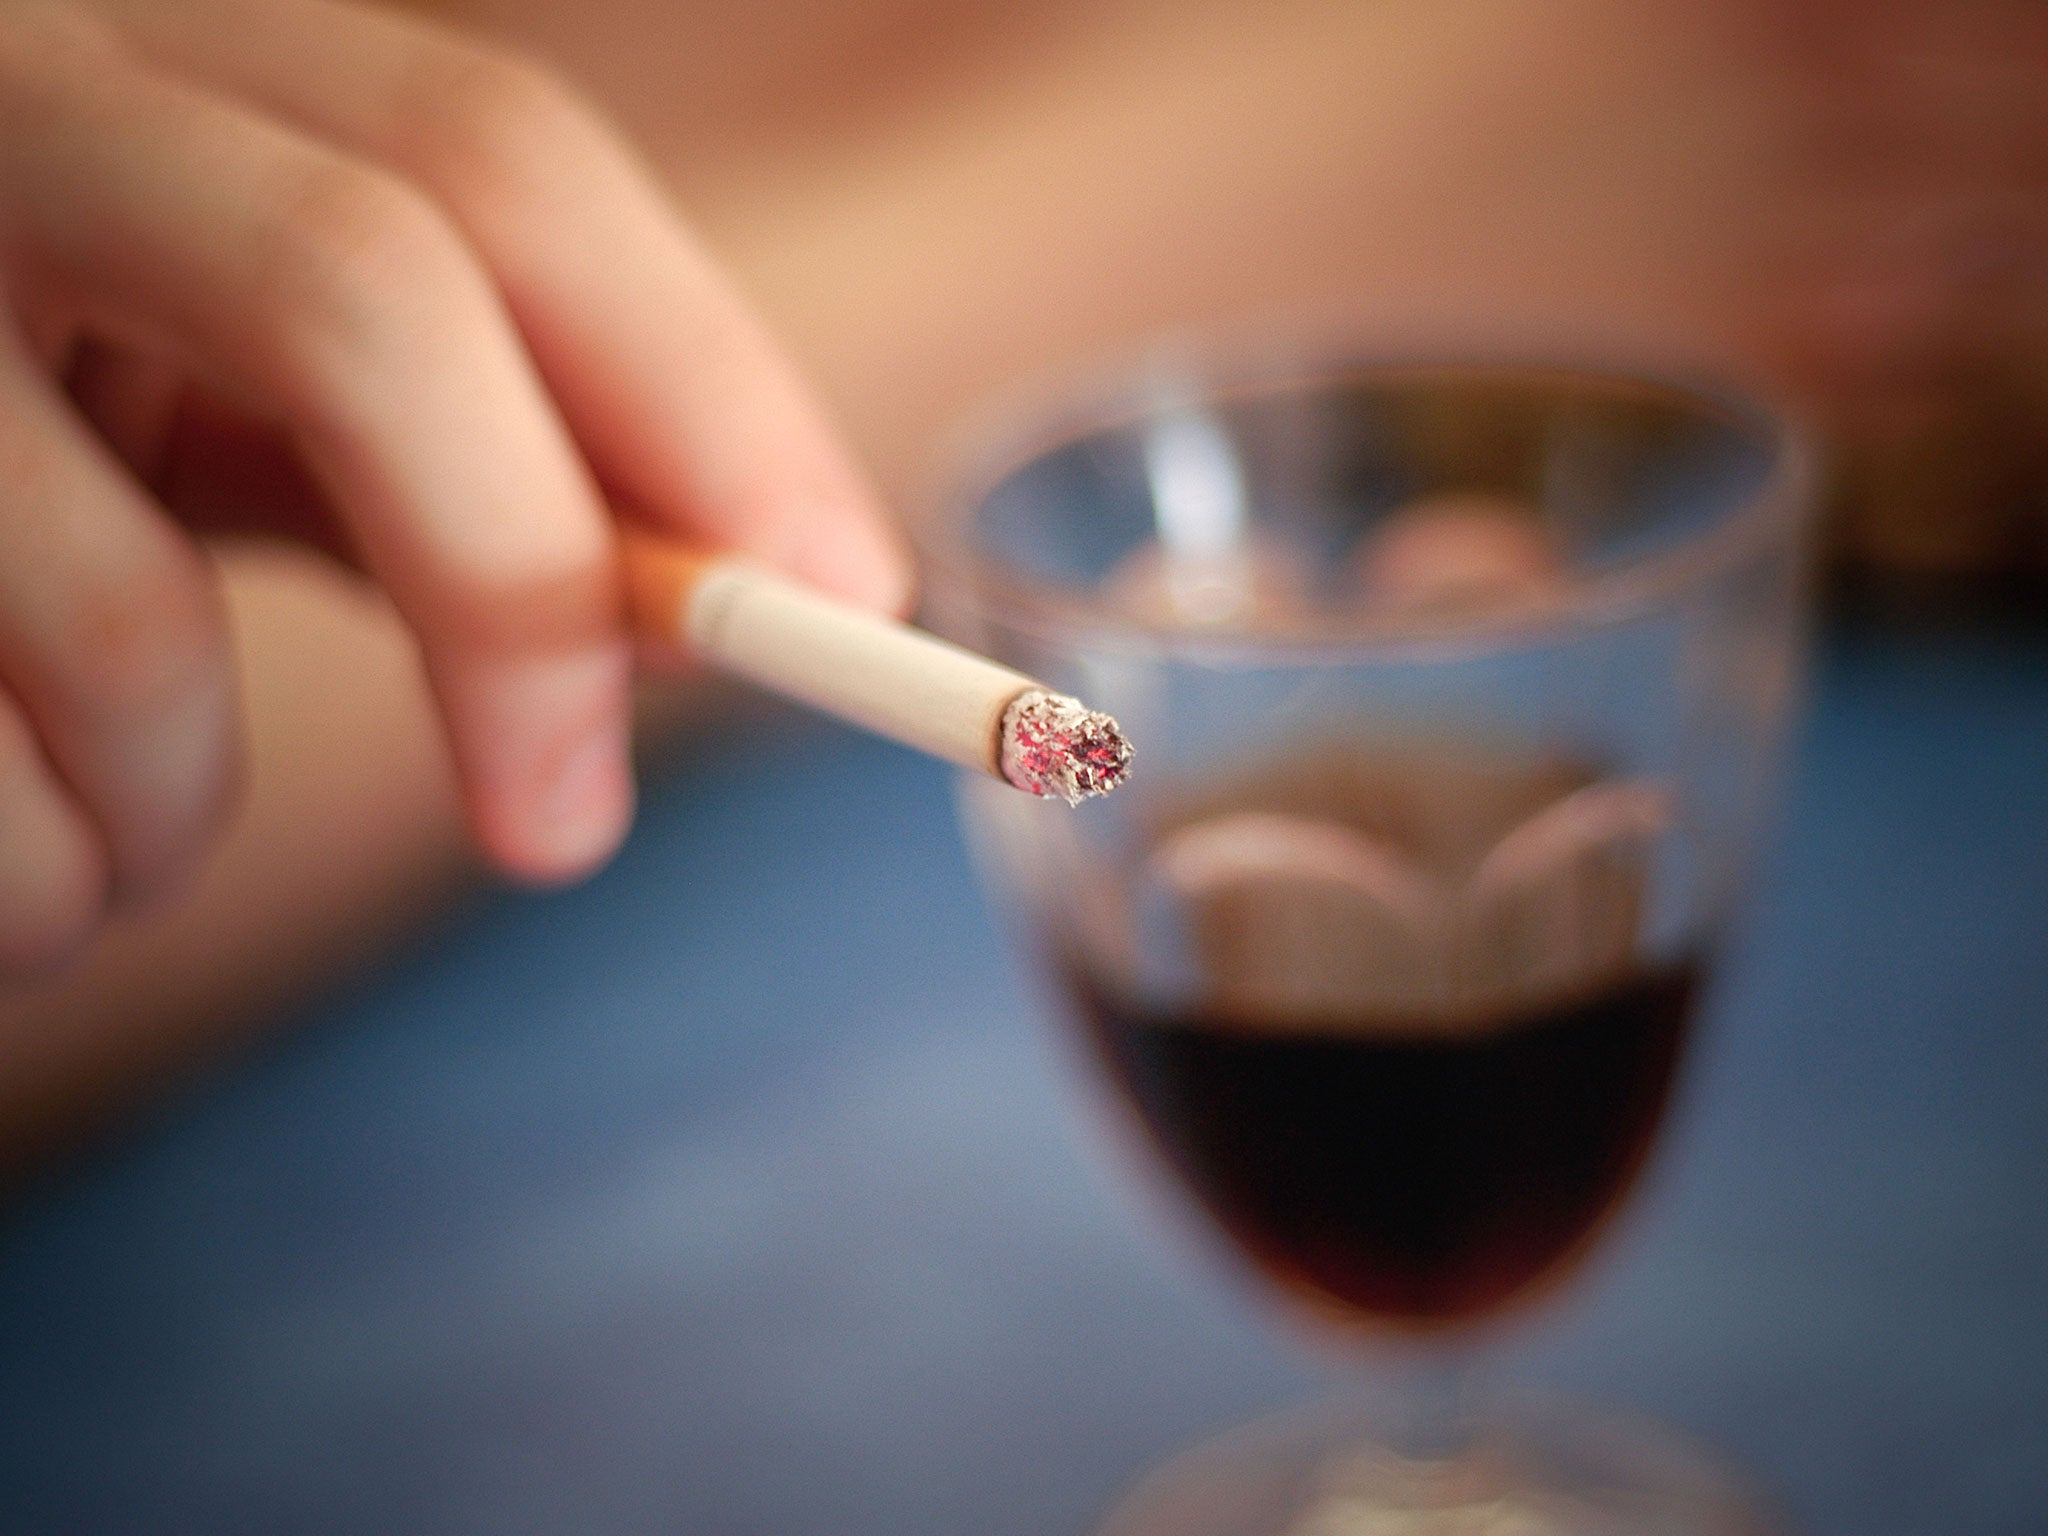 Force of habit: not making unrealistic resolutions actually makes it easier to cut down on drinking and smoking